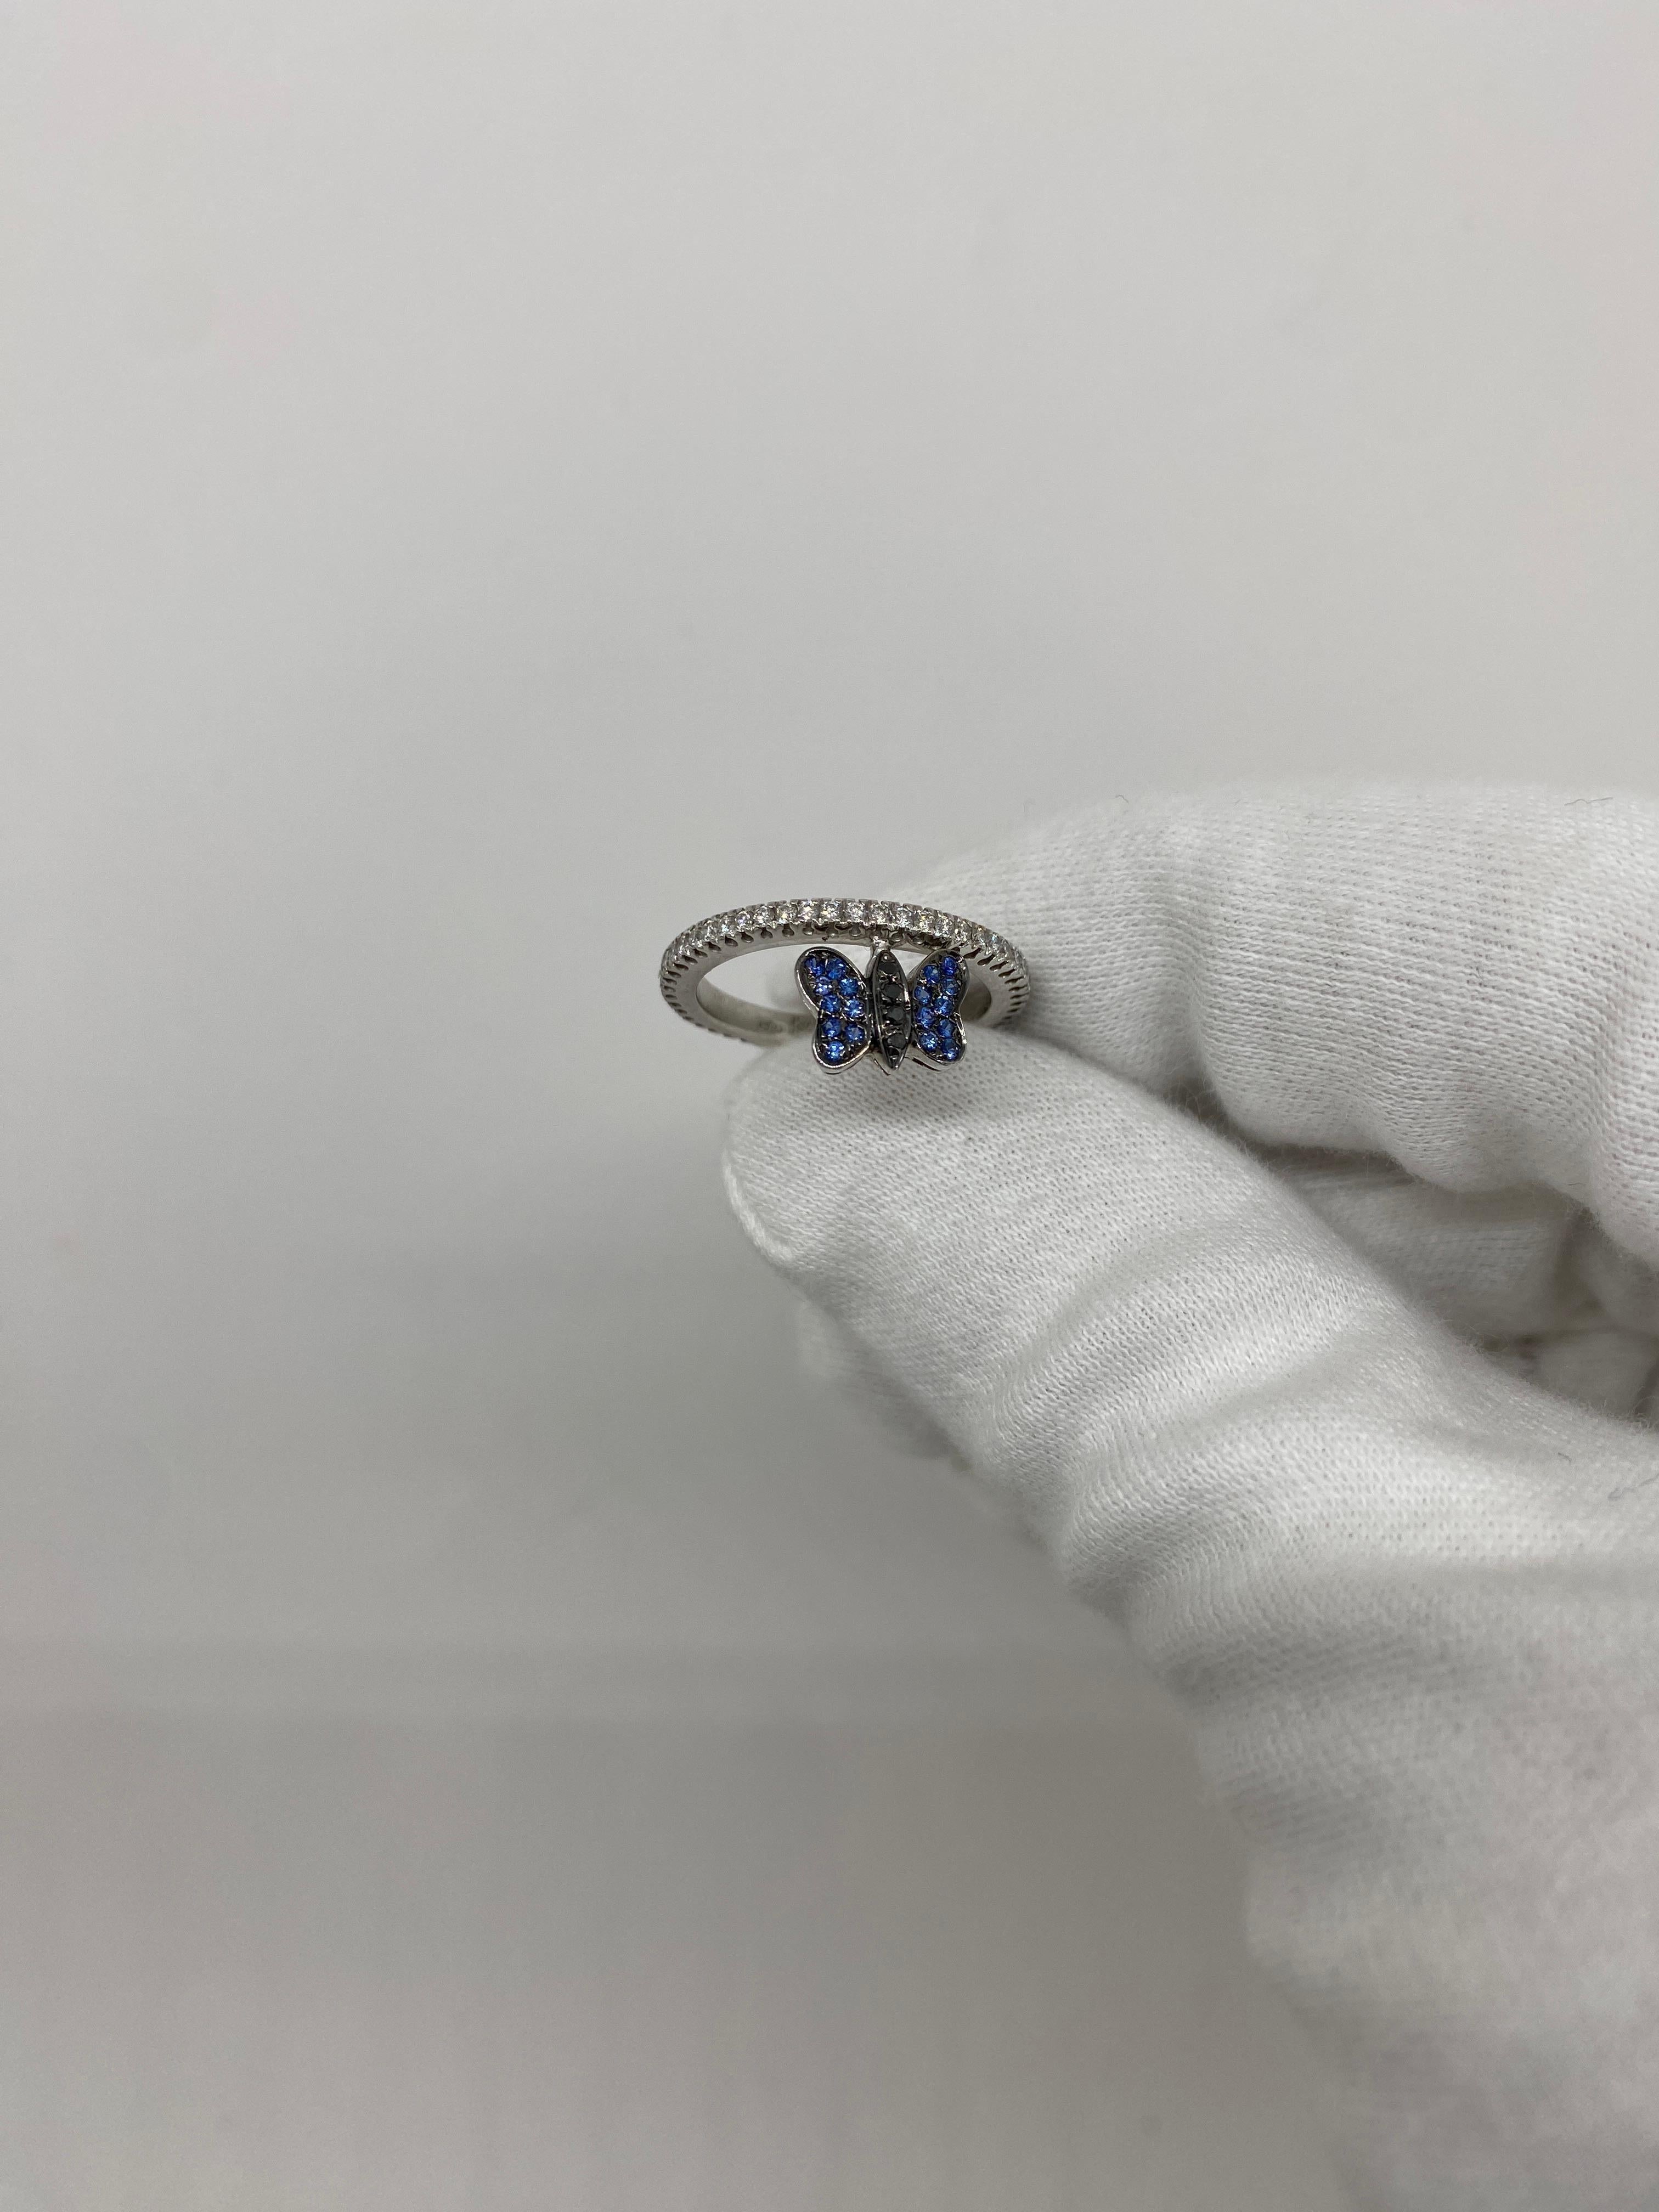 Ring made of 18kt white gold with natural brilliant-cut white diamonds for ct.0.38 blue sapphires for ct .0.10 and natural black diamonds for ct .0.10 

Welcome to our jewelry collection, where every piece tells a story of timeless elegance and